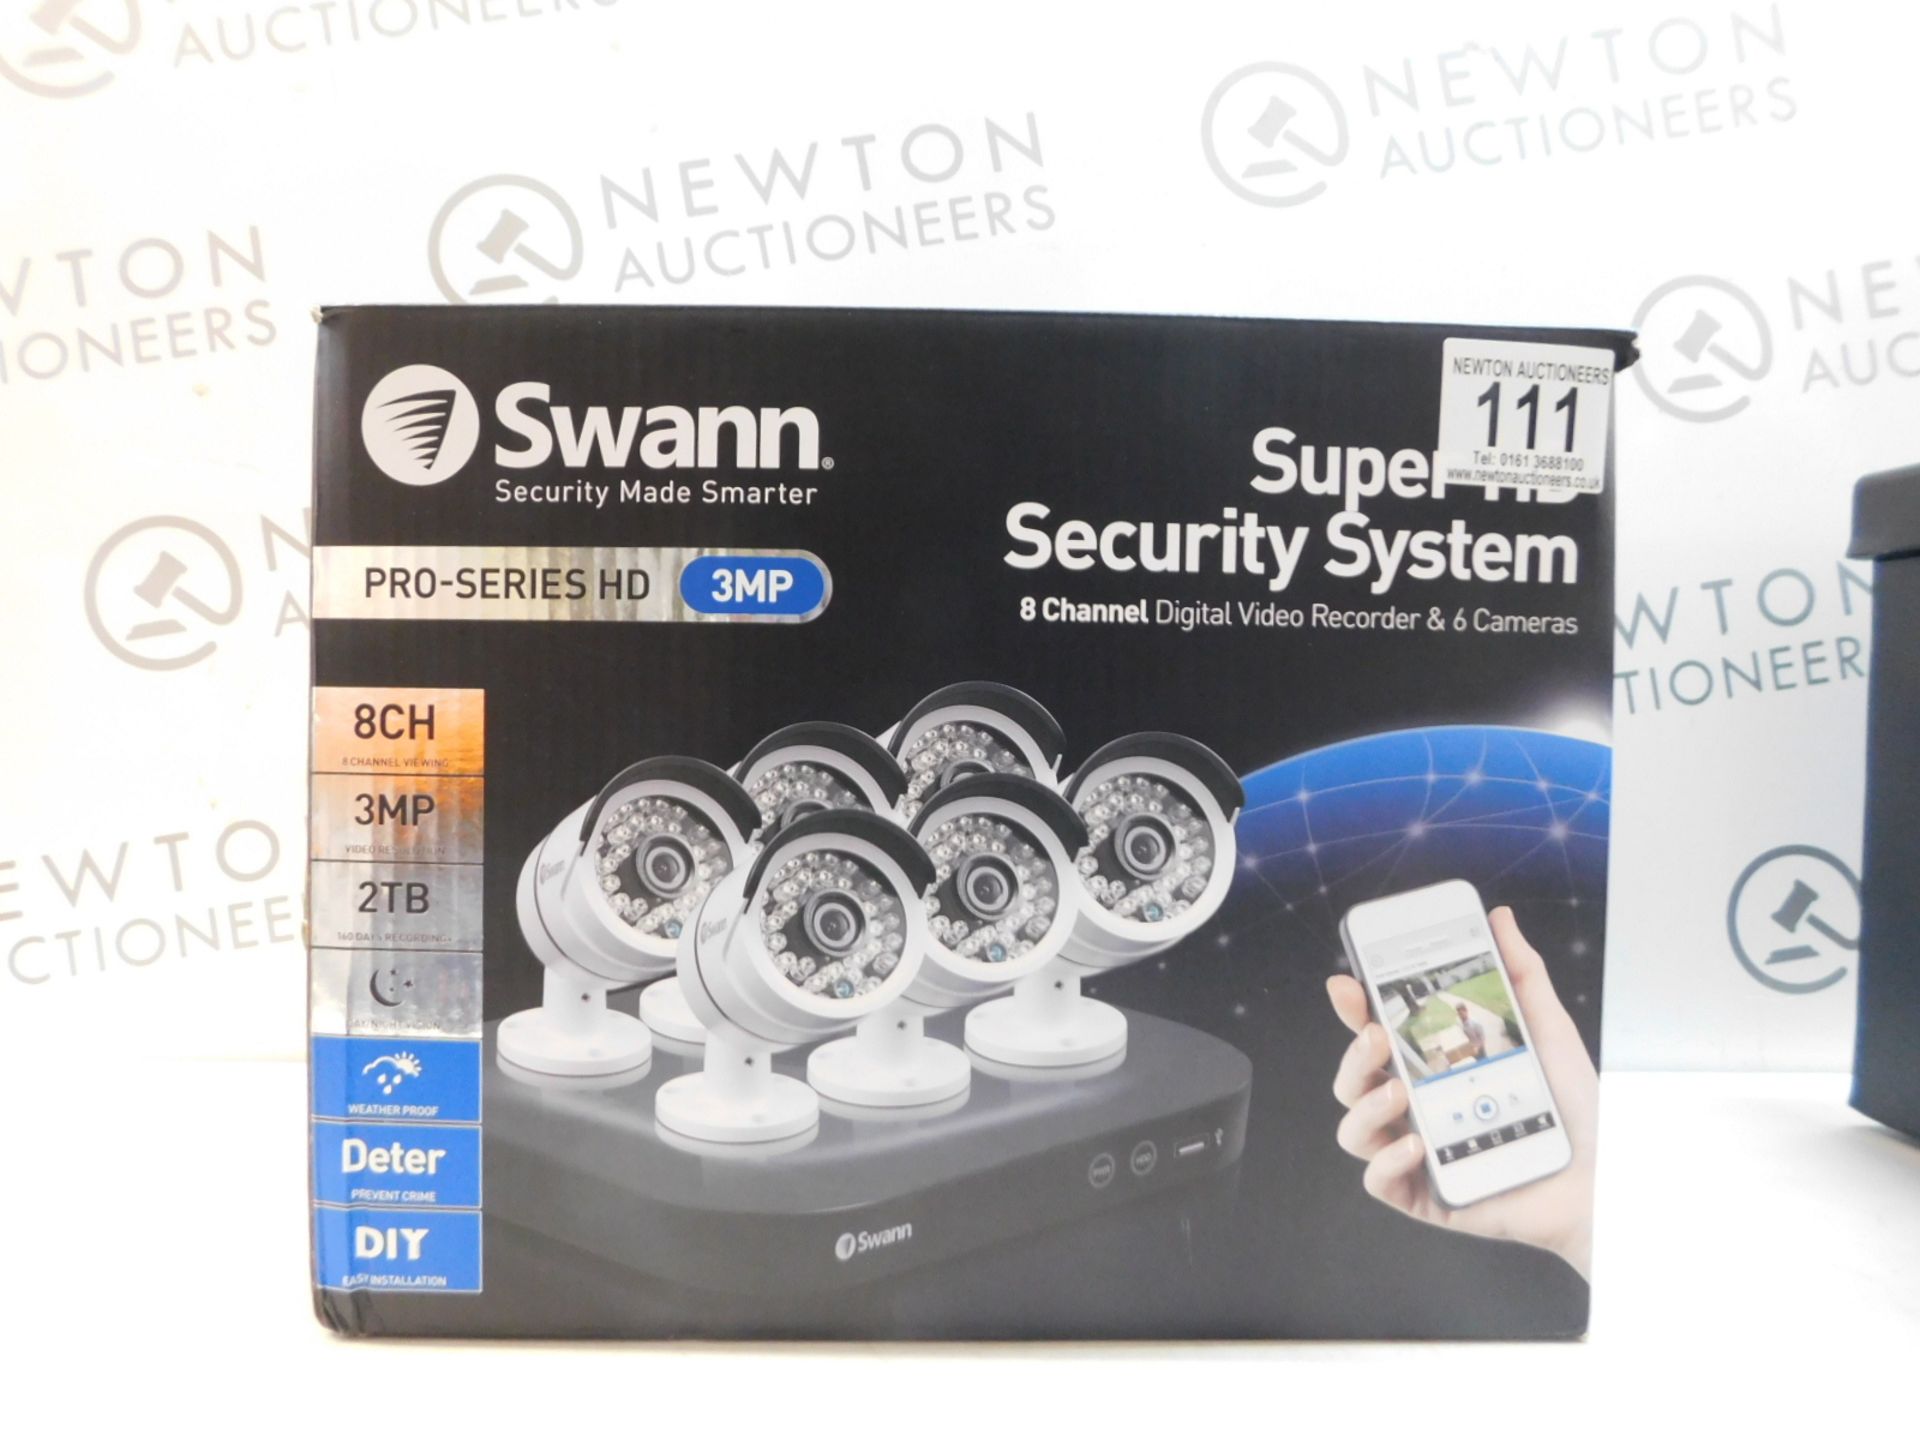 1 BOXED SWANN PRO-SERIES HD SECURITY SYSTEM - DVR8-4750 8CH 3MP HD DIGITAL VIDEO RECORDER & 6 PRO-